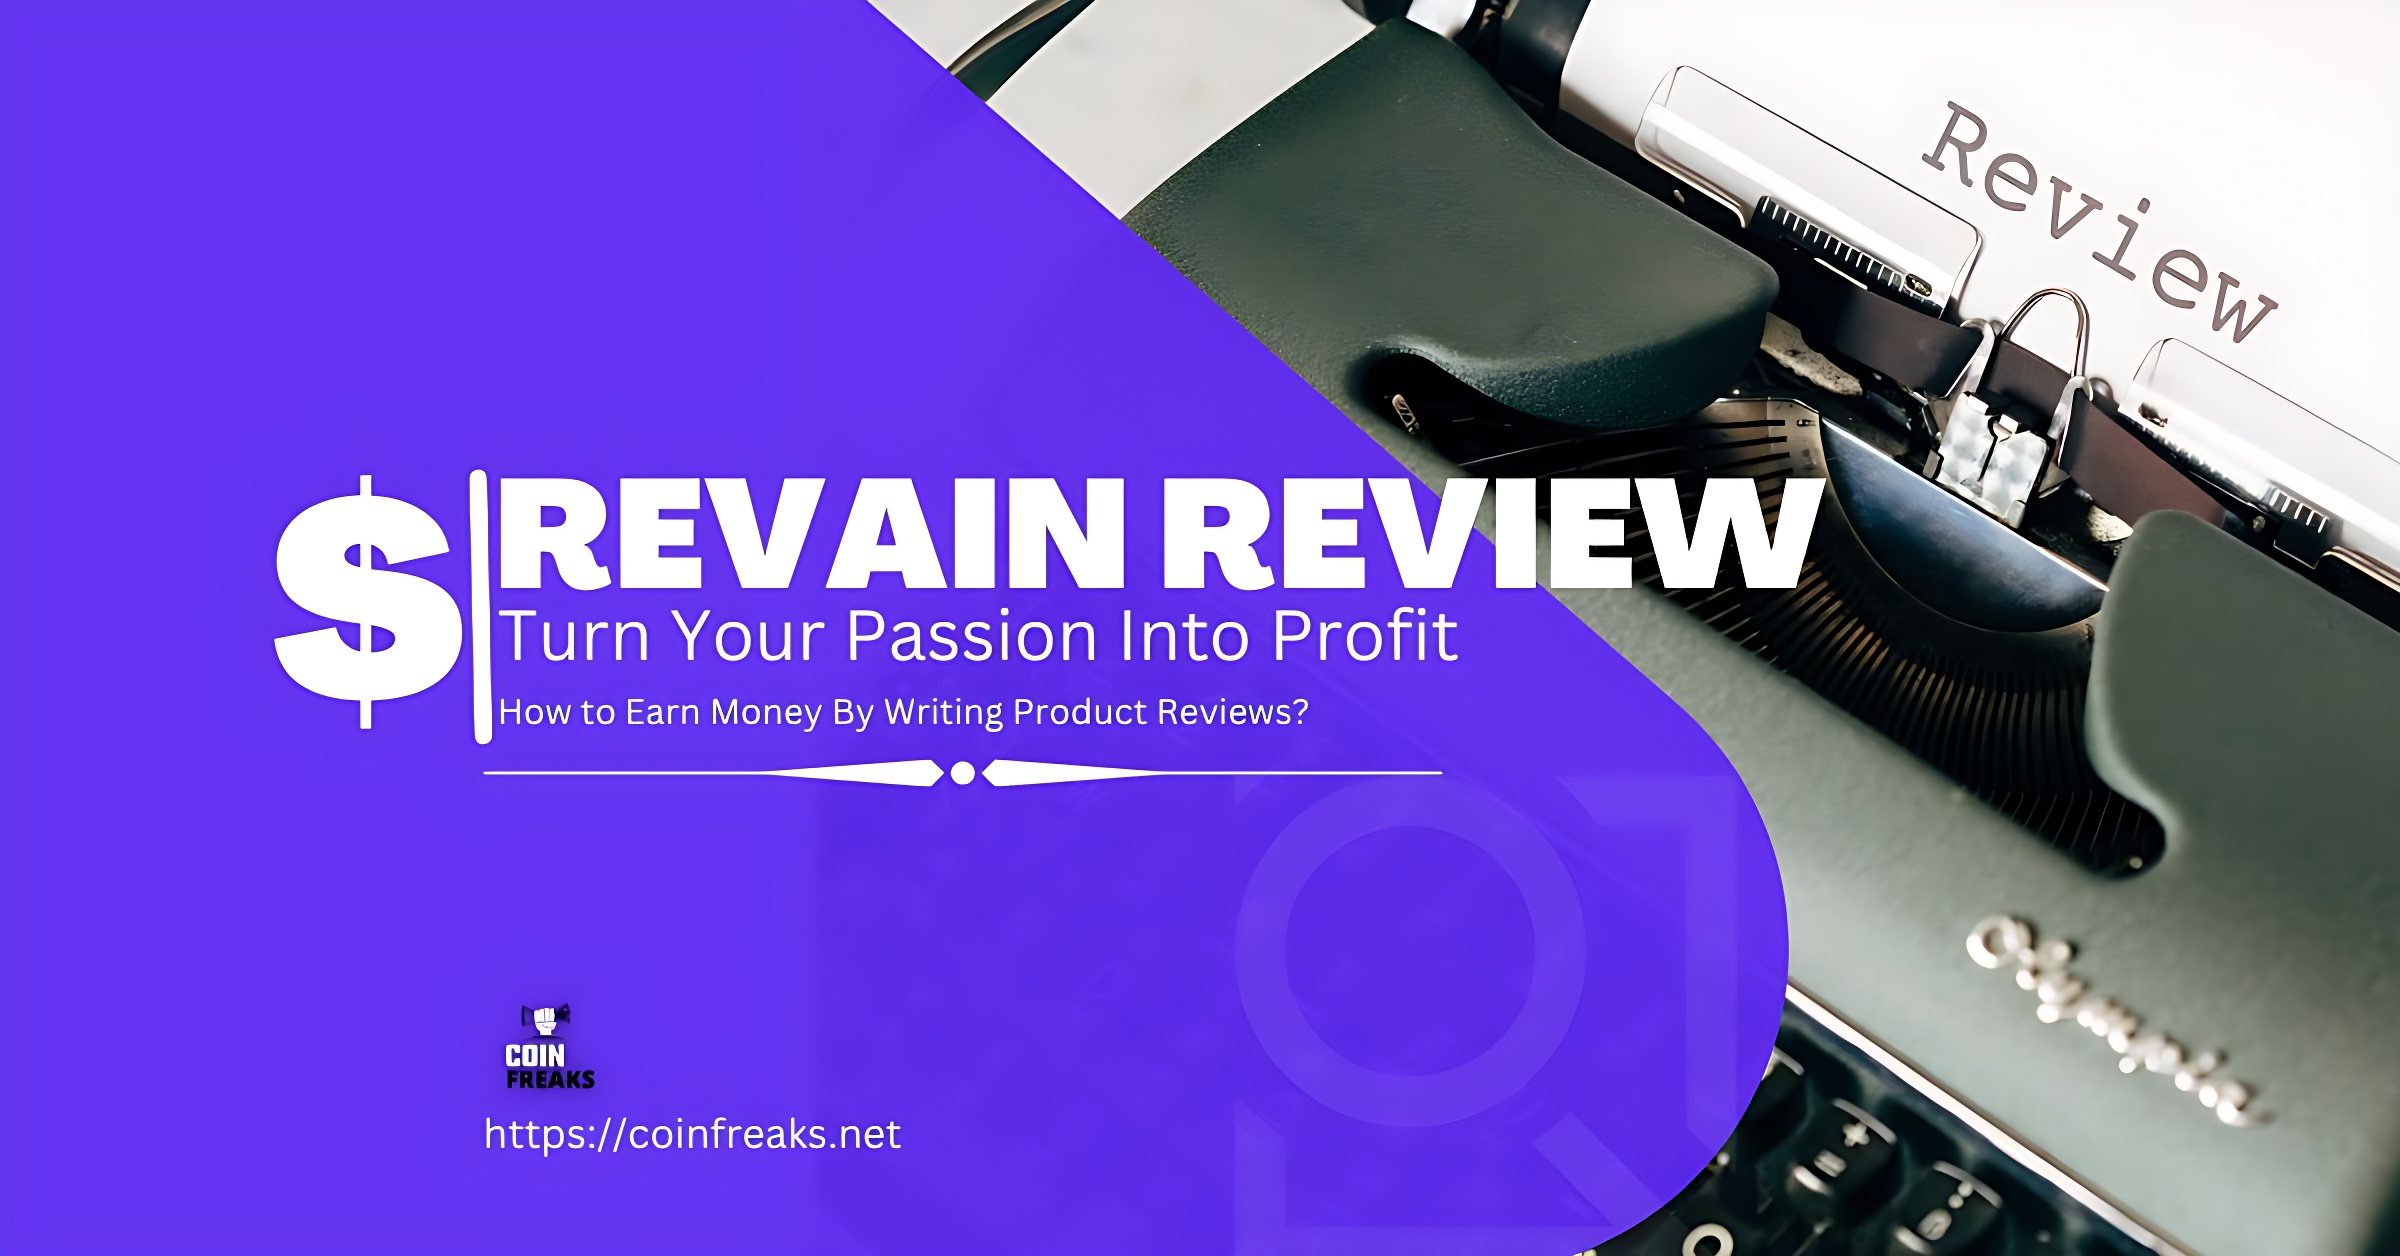 Turn Your Passion Into Profit: How to Earn Money By Writing Product Reviews?